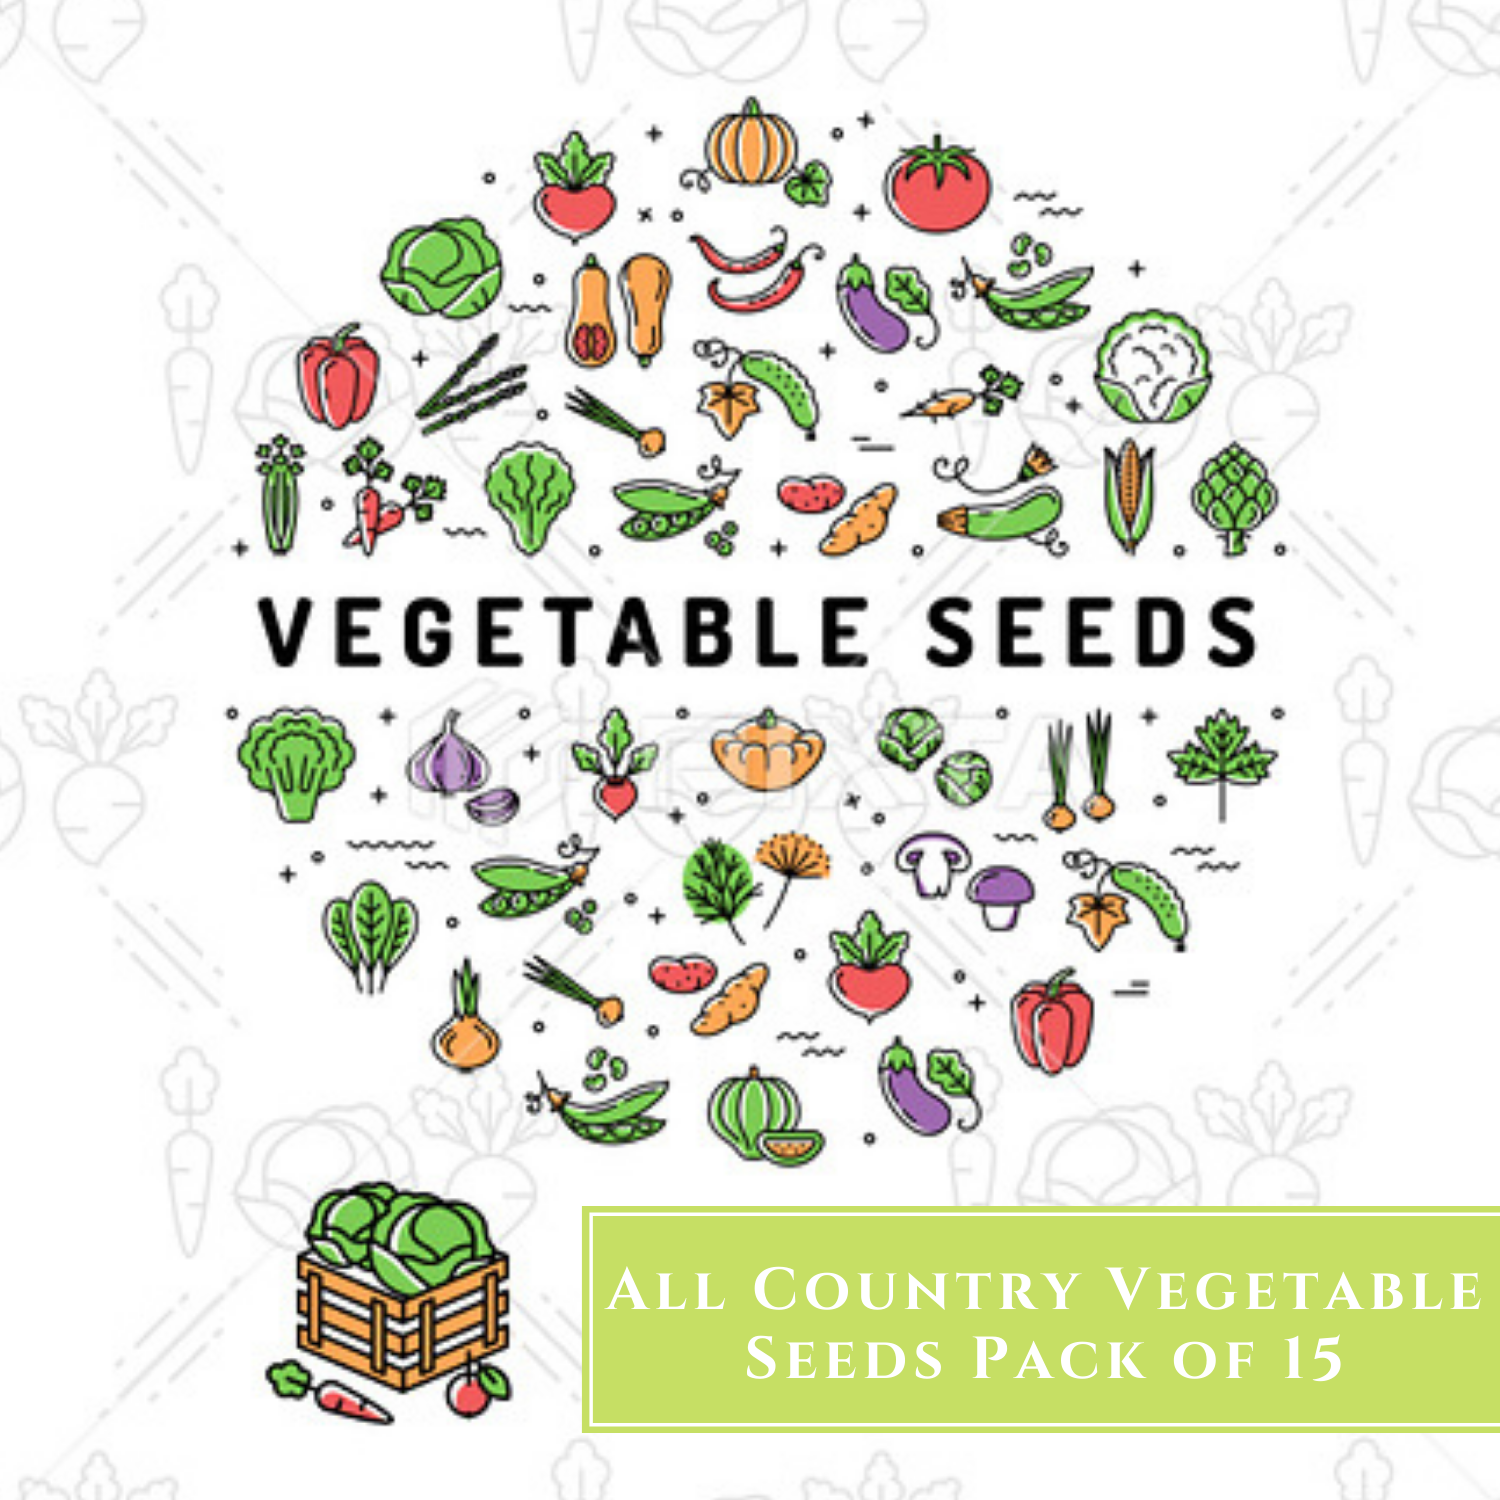 All Country Vegetable seeds pack of 15